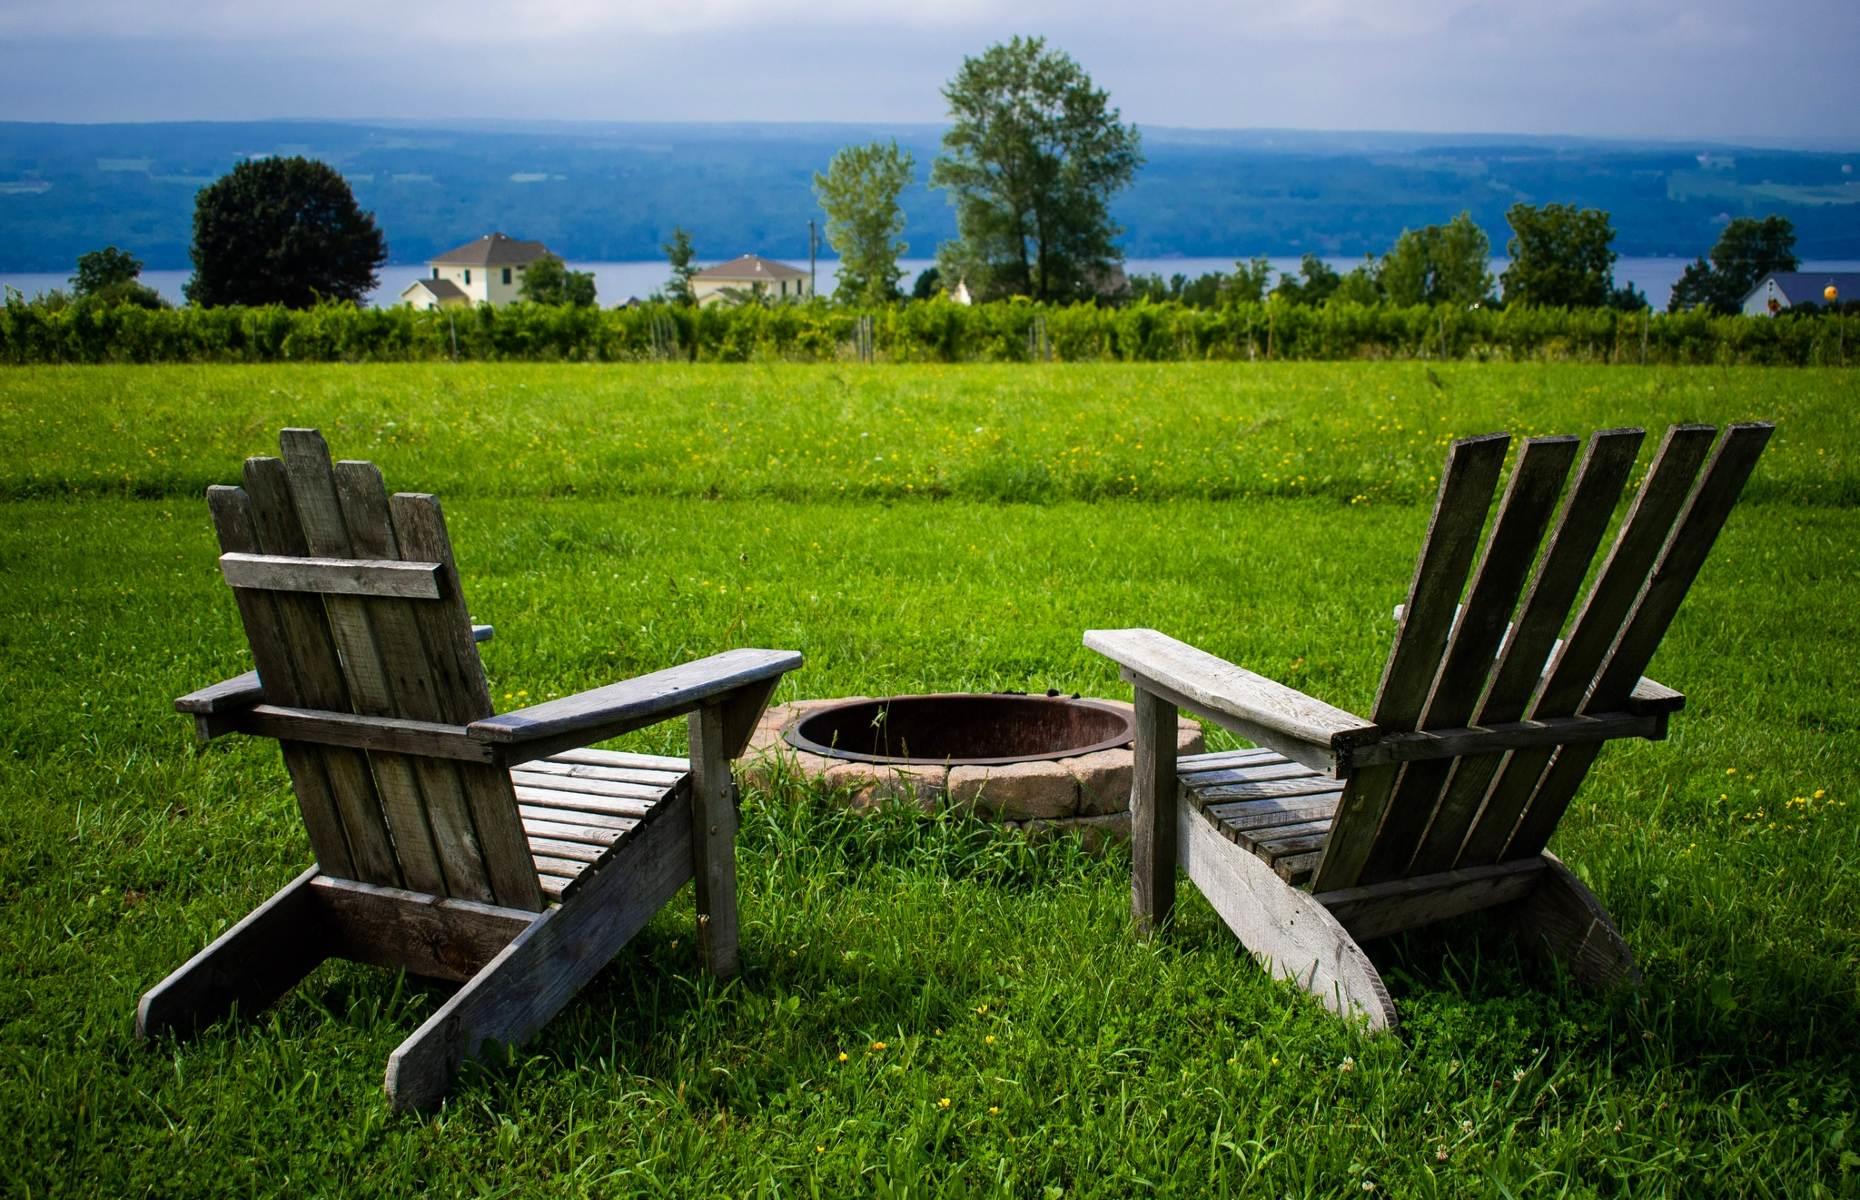 <p>New York’s Finger Lakes region is popular for its charming towns and stunning scenery – but it’s also a fabulous wine region. Rather than trying to cram in a visit to all the best vineyards in one day, why not make a trip out of it? At <a href="https://thevineyardvillas.com/">Vineyard Villas</a>, located on the east side of Seneca Lake, you’ll find idyllic villas overlooking the lake and surrounding wineries, which can be booked for two to six people. We can’t think of a much prettier place to unwind with a glass of vino. </p>